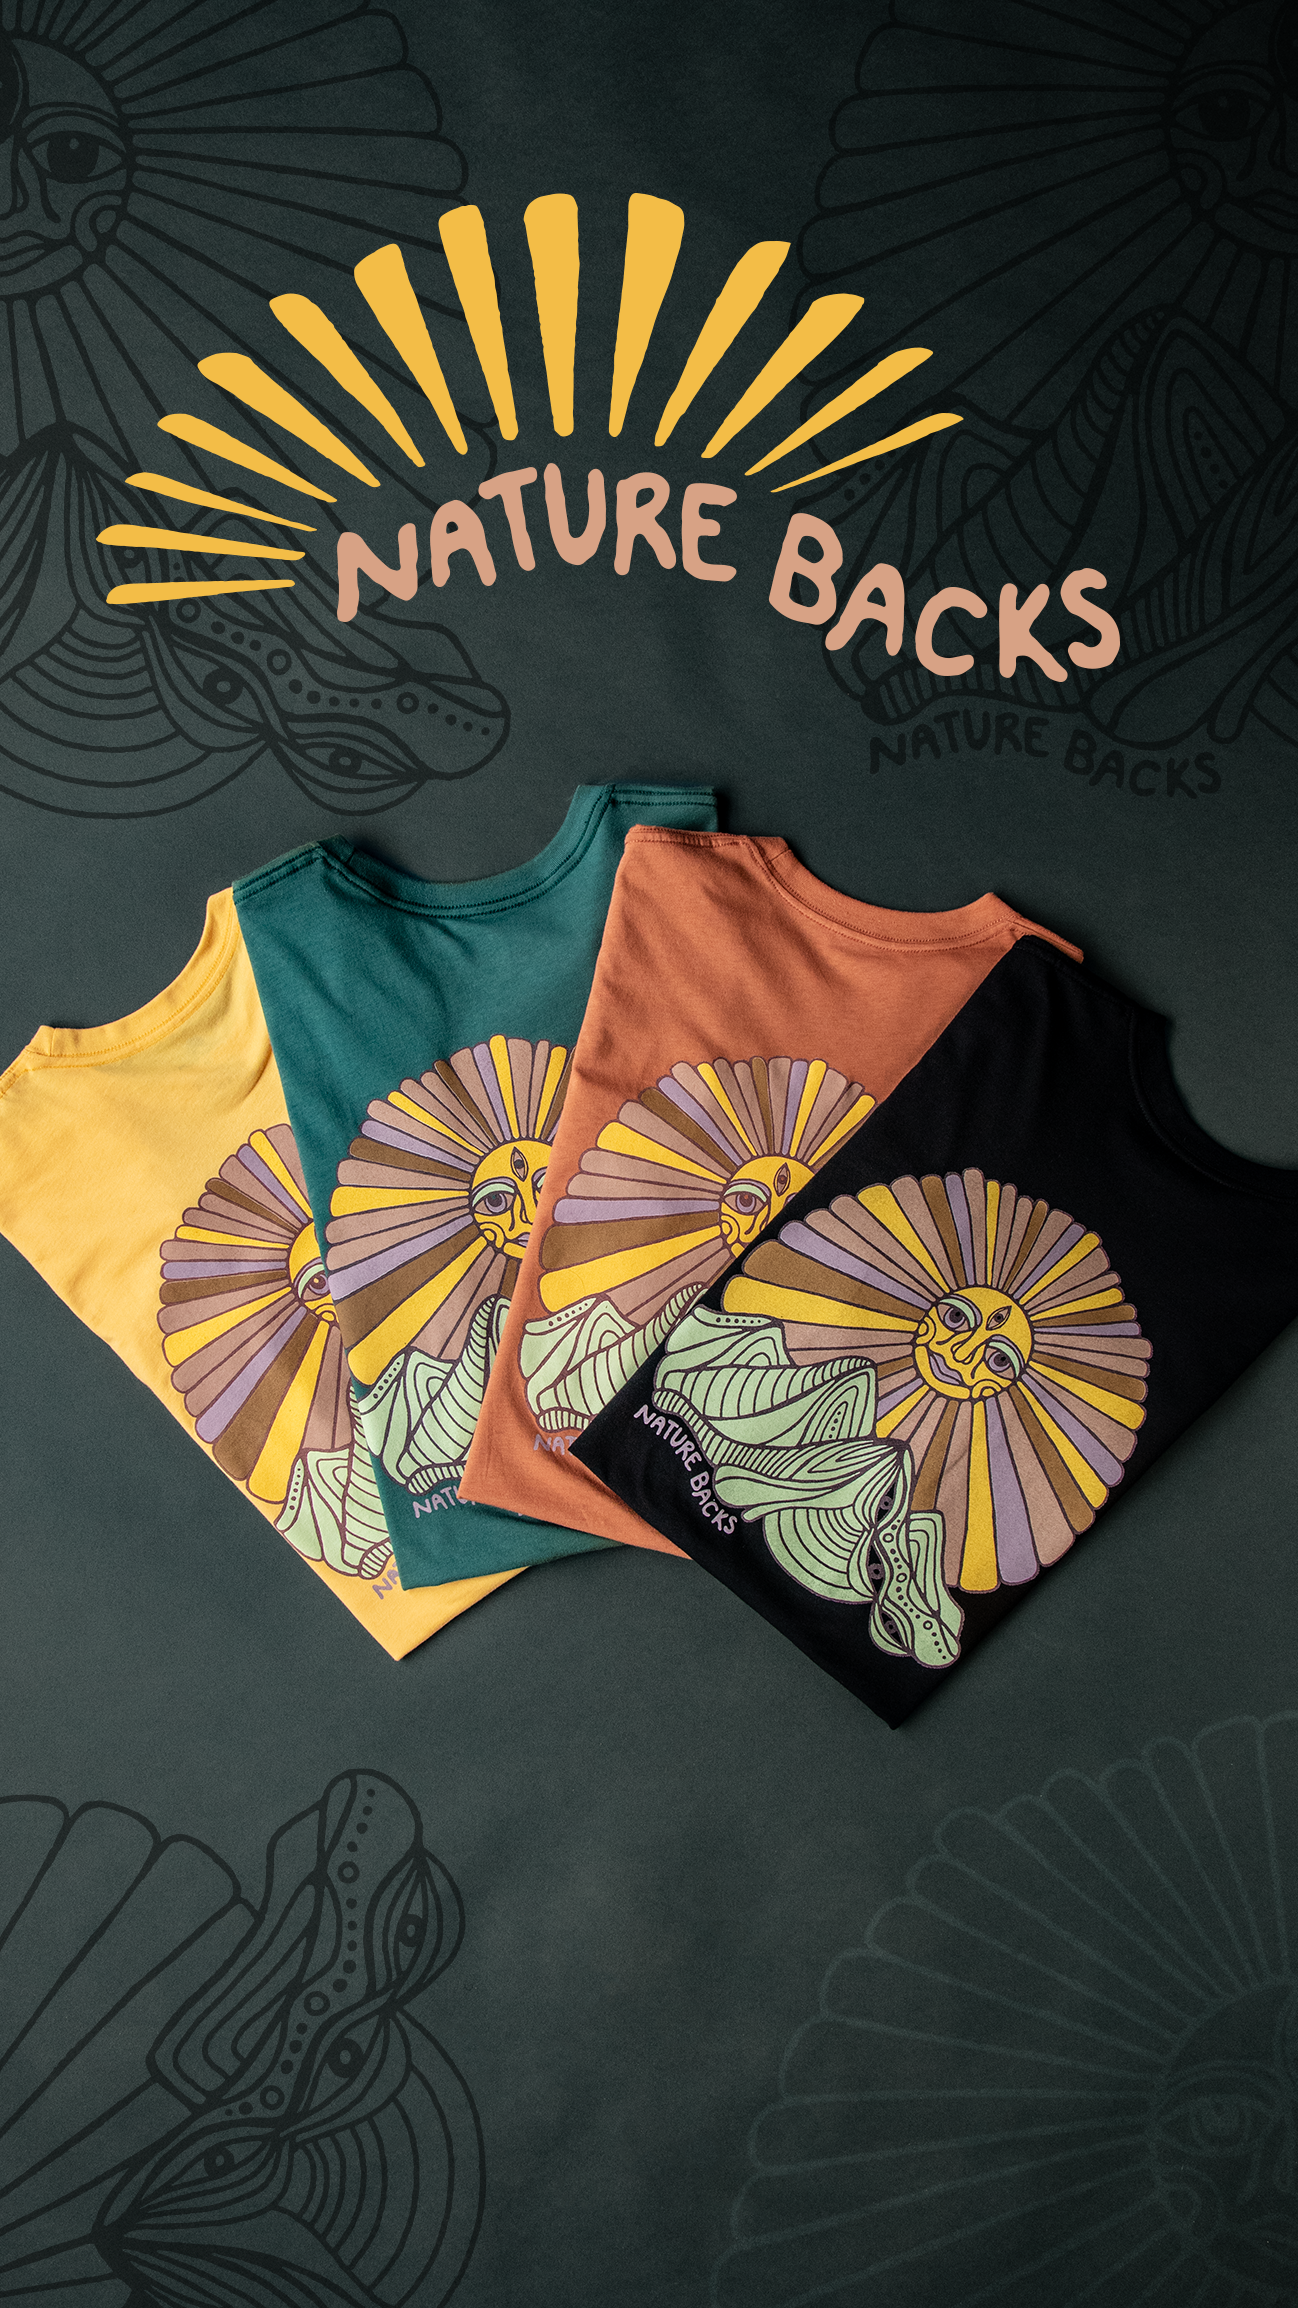 Nature Backs Limited Edition Short Sleeve 100% Organic Cotton T-Shirt | Limited Awaken Harvest Short Sleeve made with Eco-Friendly Fibers Sustainably made in the USA  Flat Lay  